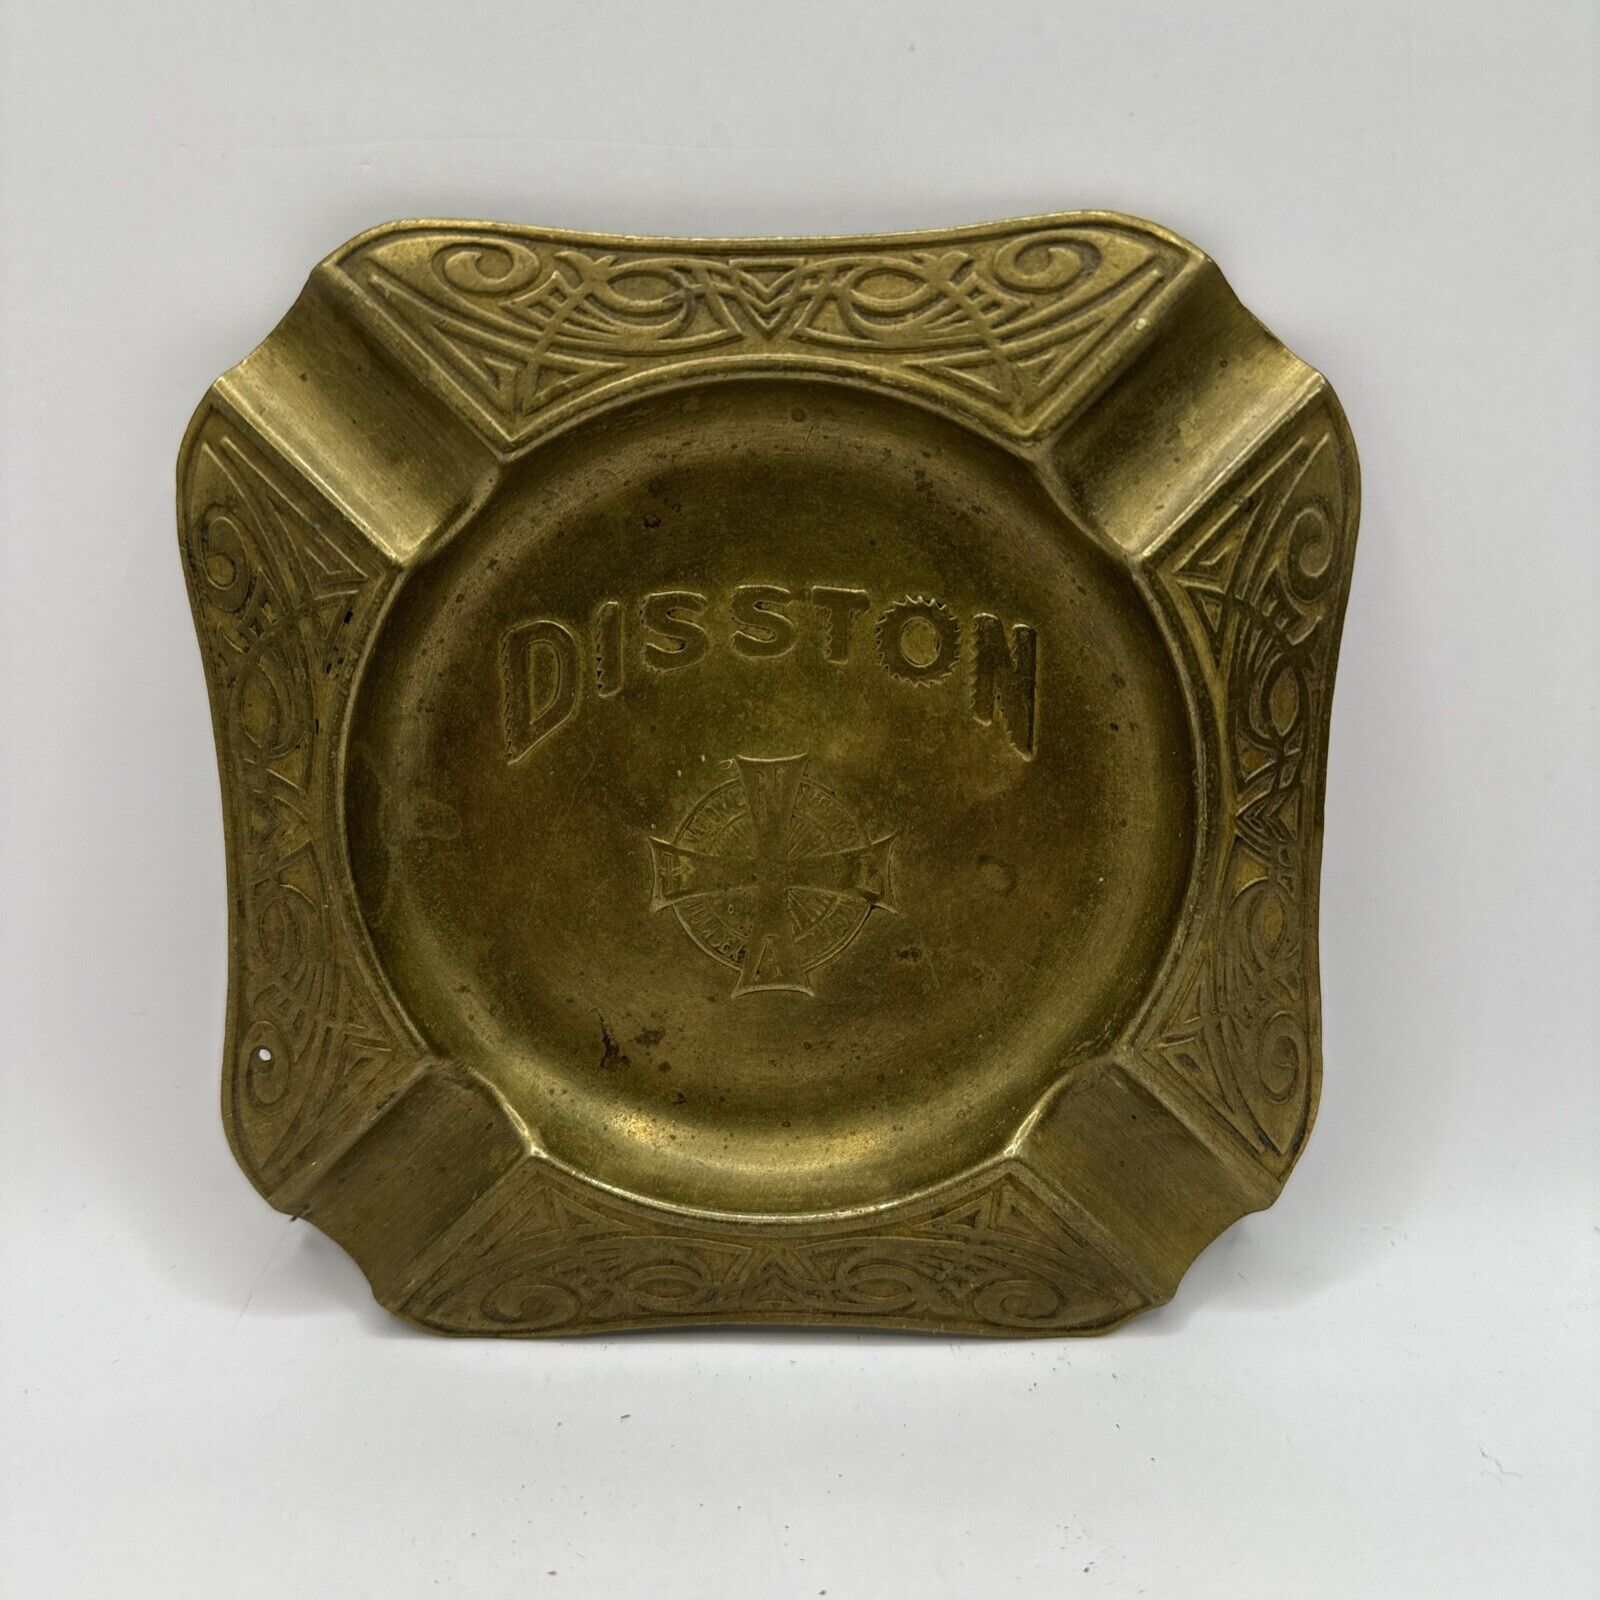 ANTIQUE DISSTON & SONS SAWS ART NOUVEAU ASHTRAY SOLID  BRASS ORNATE GREAT SHAPE